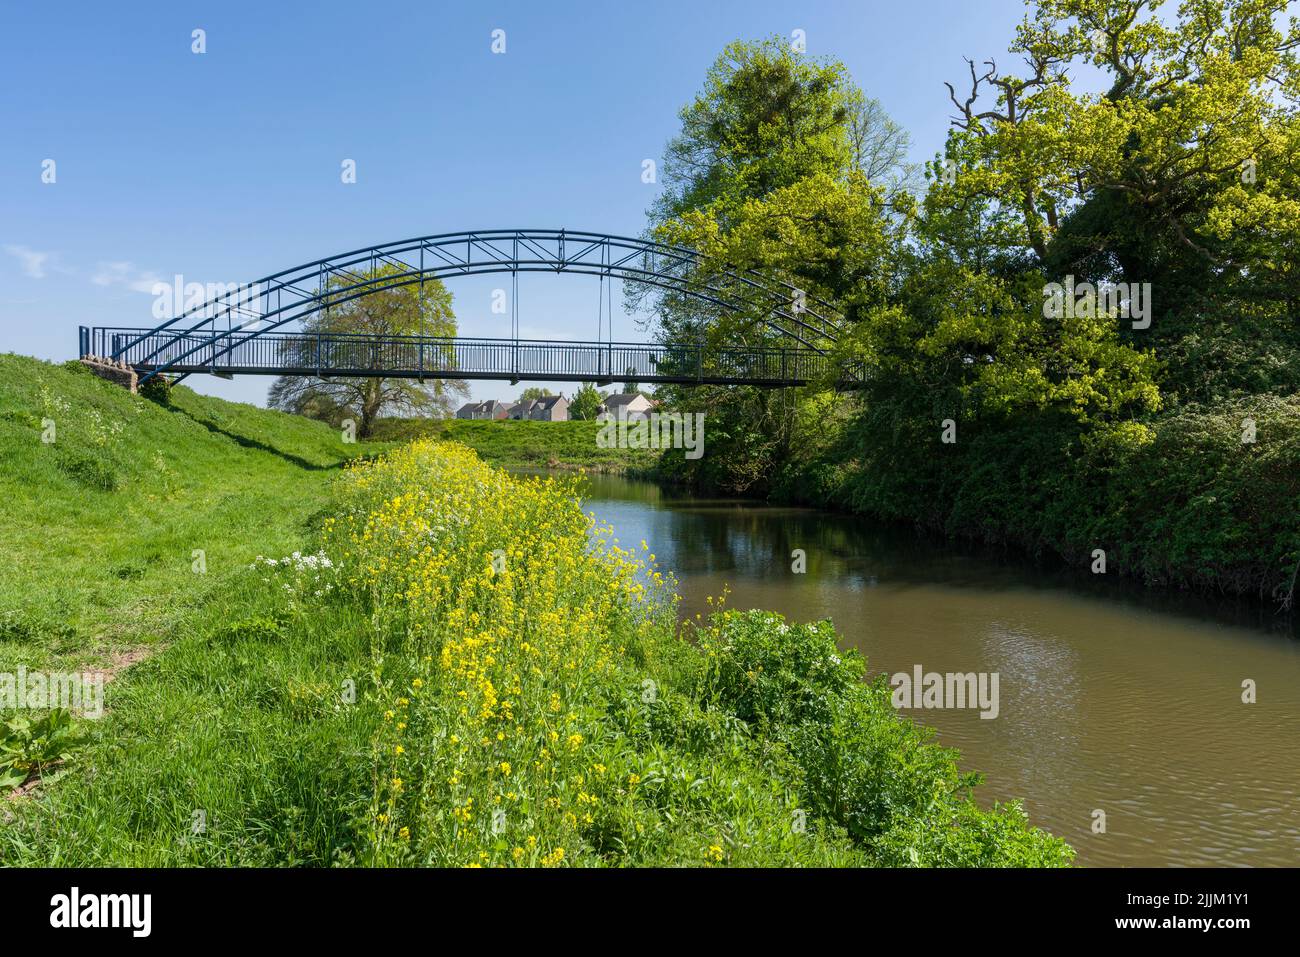 The Millennium Bridge over the River Yeo, also known as the Congresbury Yeo, at Congresbury on a sunny spring day, North Somerset, England. Stock Photo